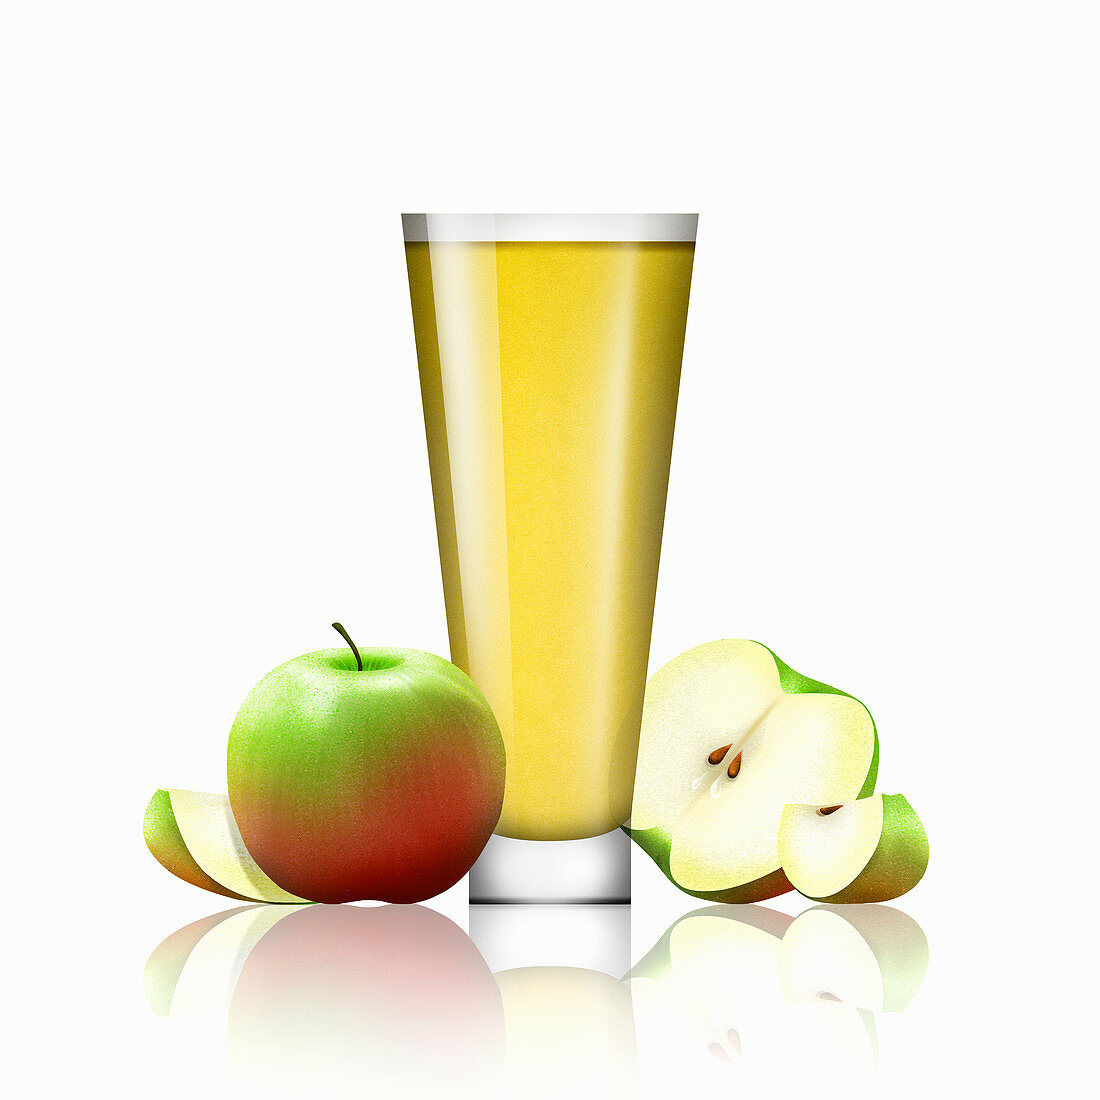 Fresh apples and glass of apple juice, illustration